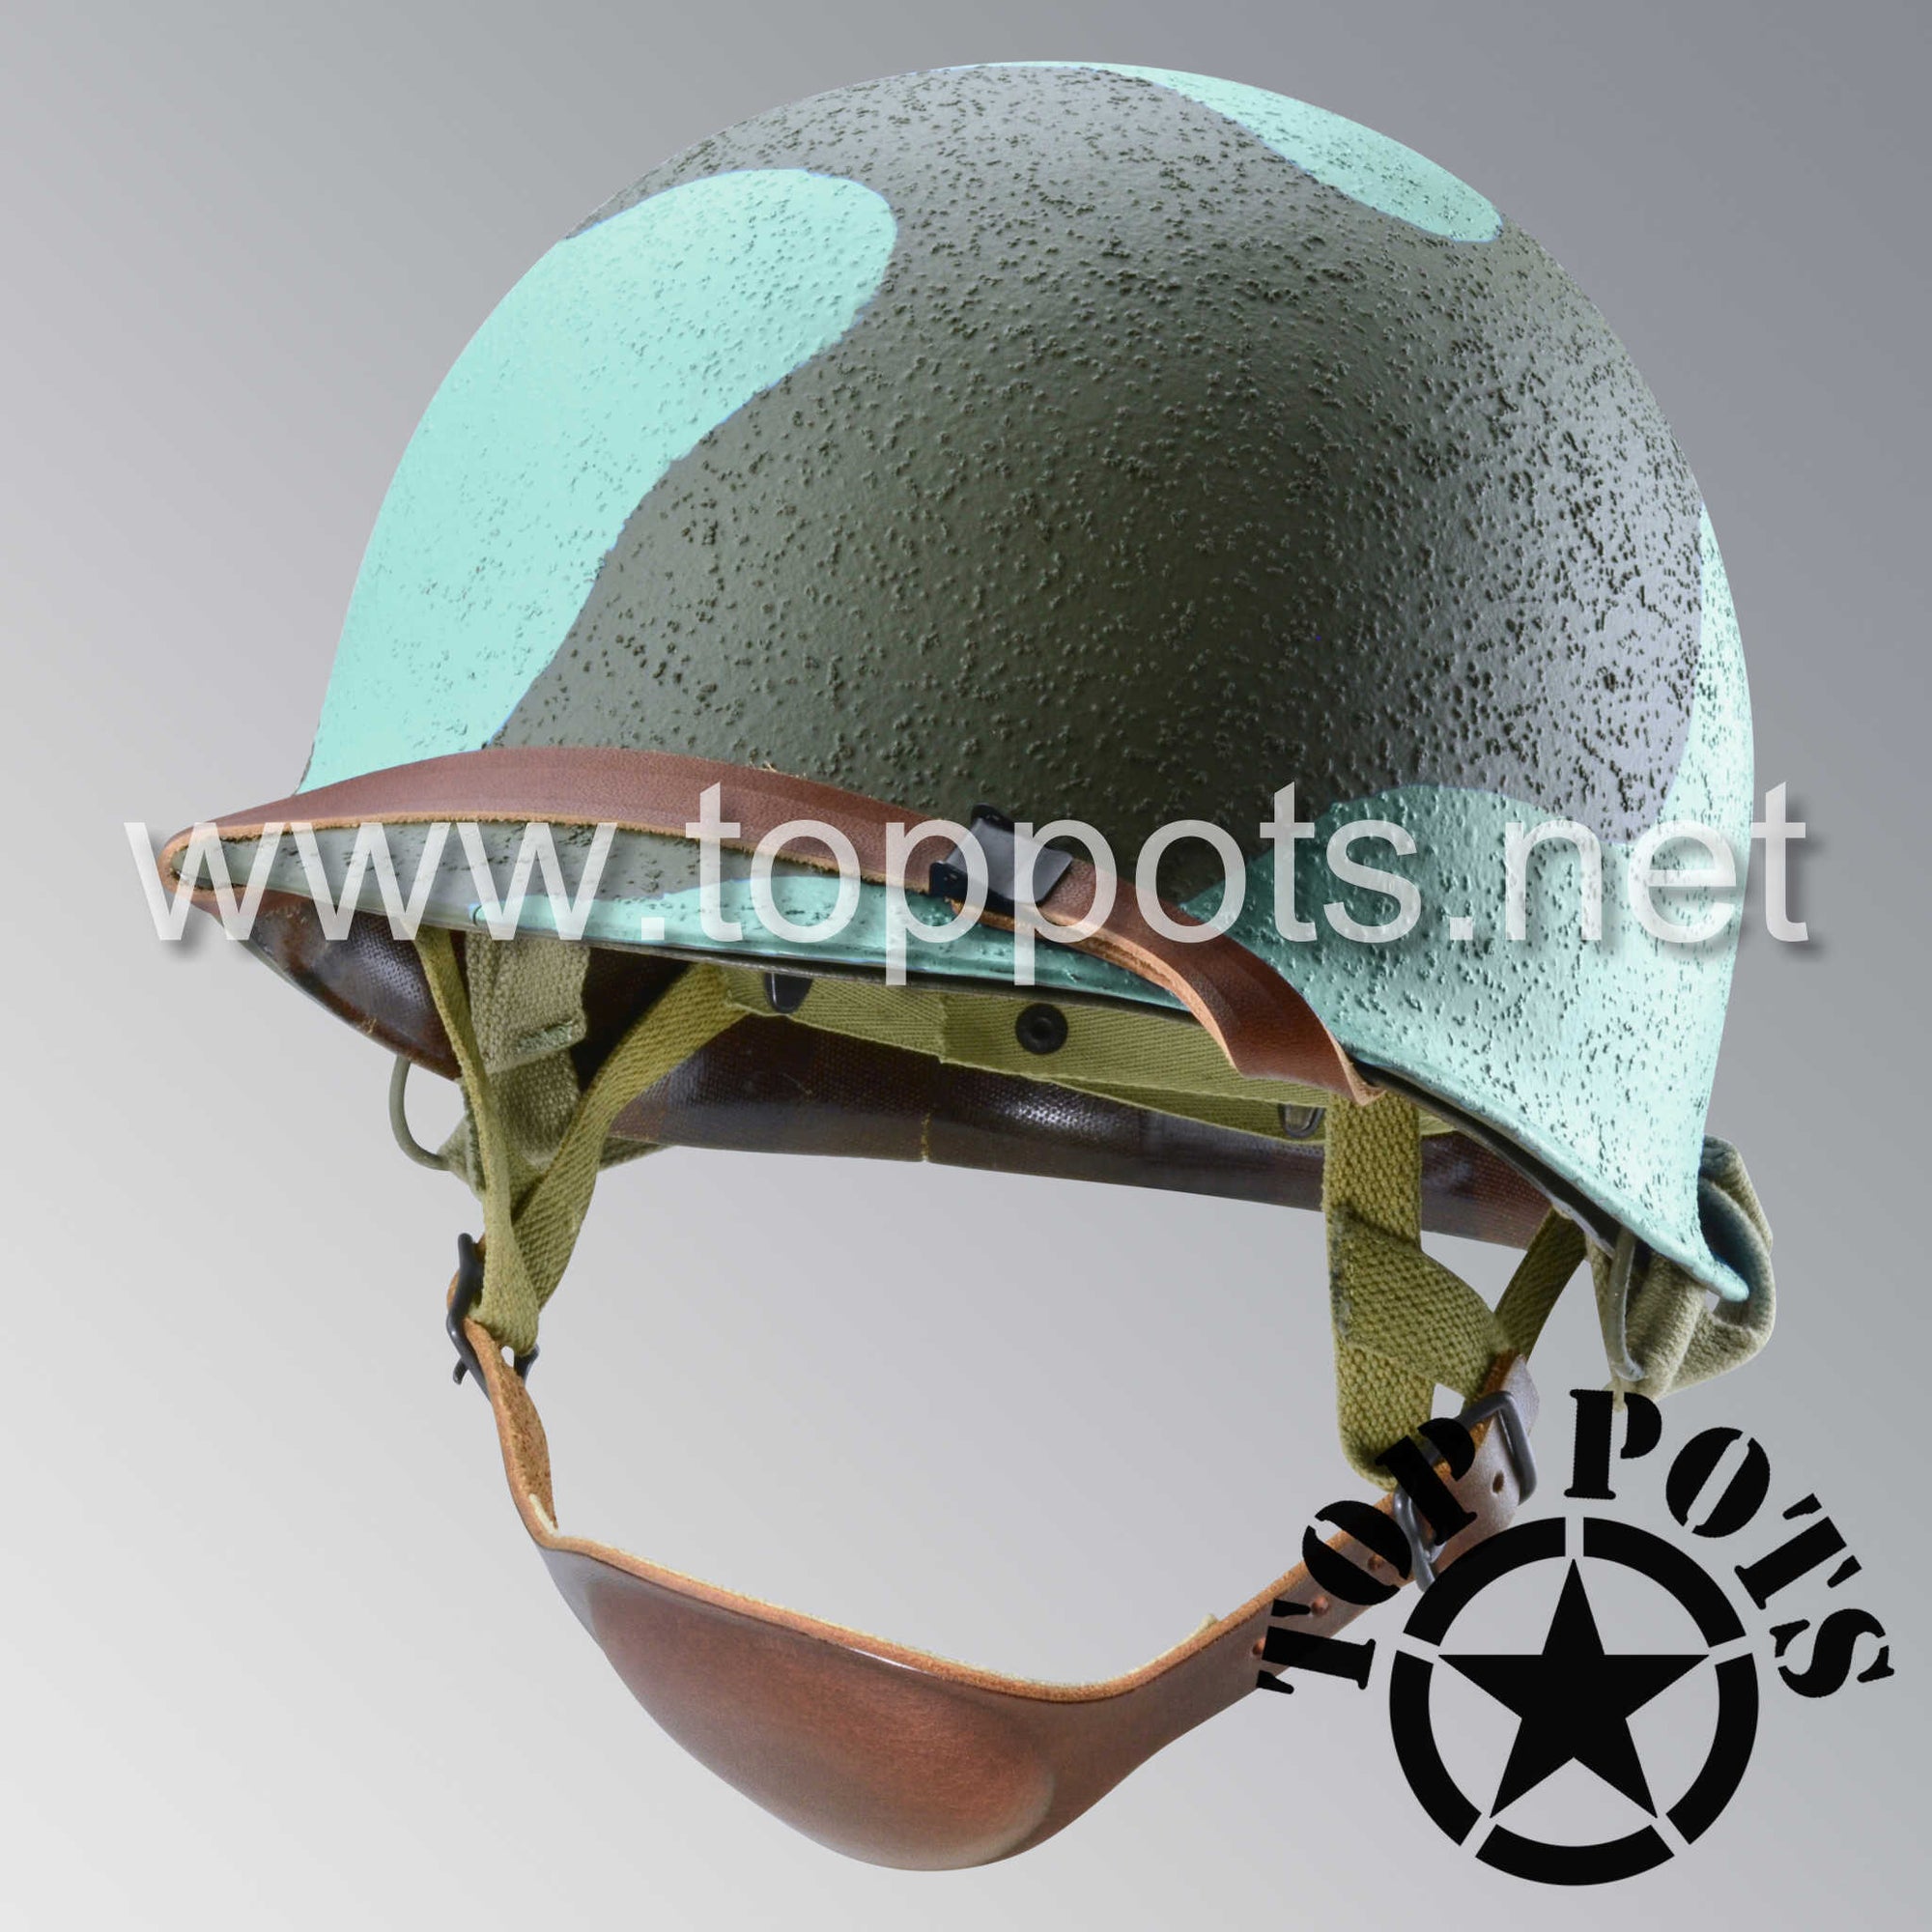 WWII USMC Marine Corps M2 Para Marine Paratrooper Airborne Helmet D Bale Shell and Liner with Pacific Water Camouflage Emblem - Sea Foam Blue